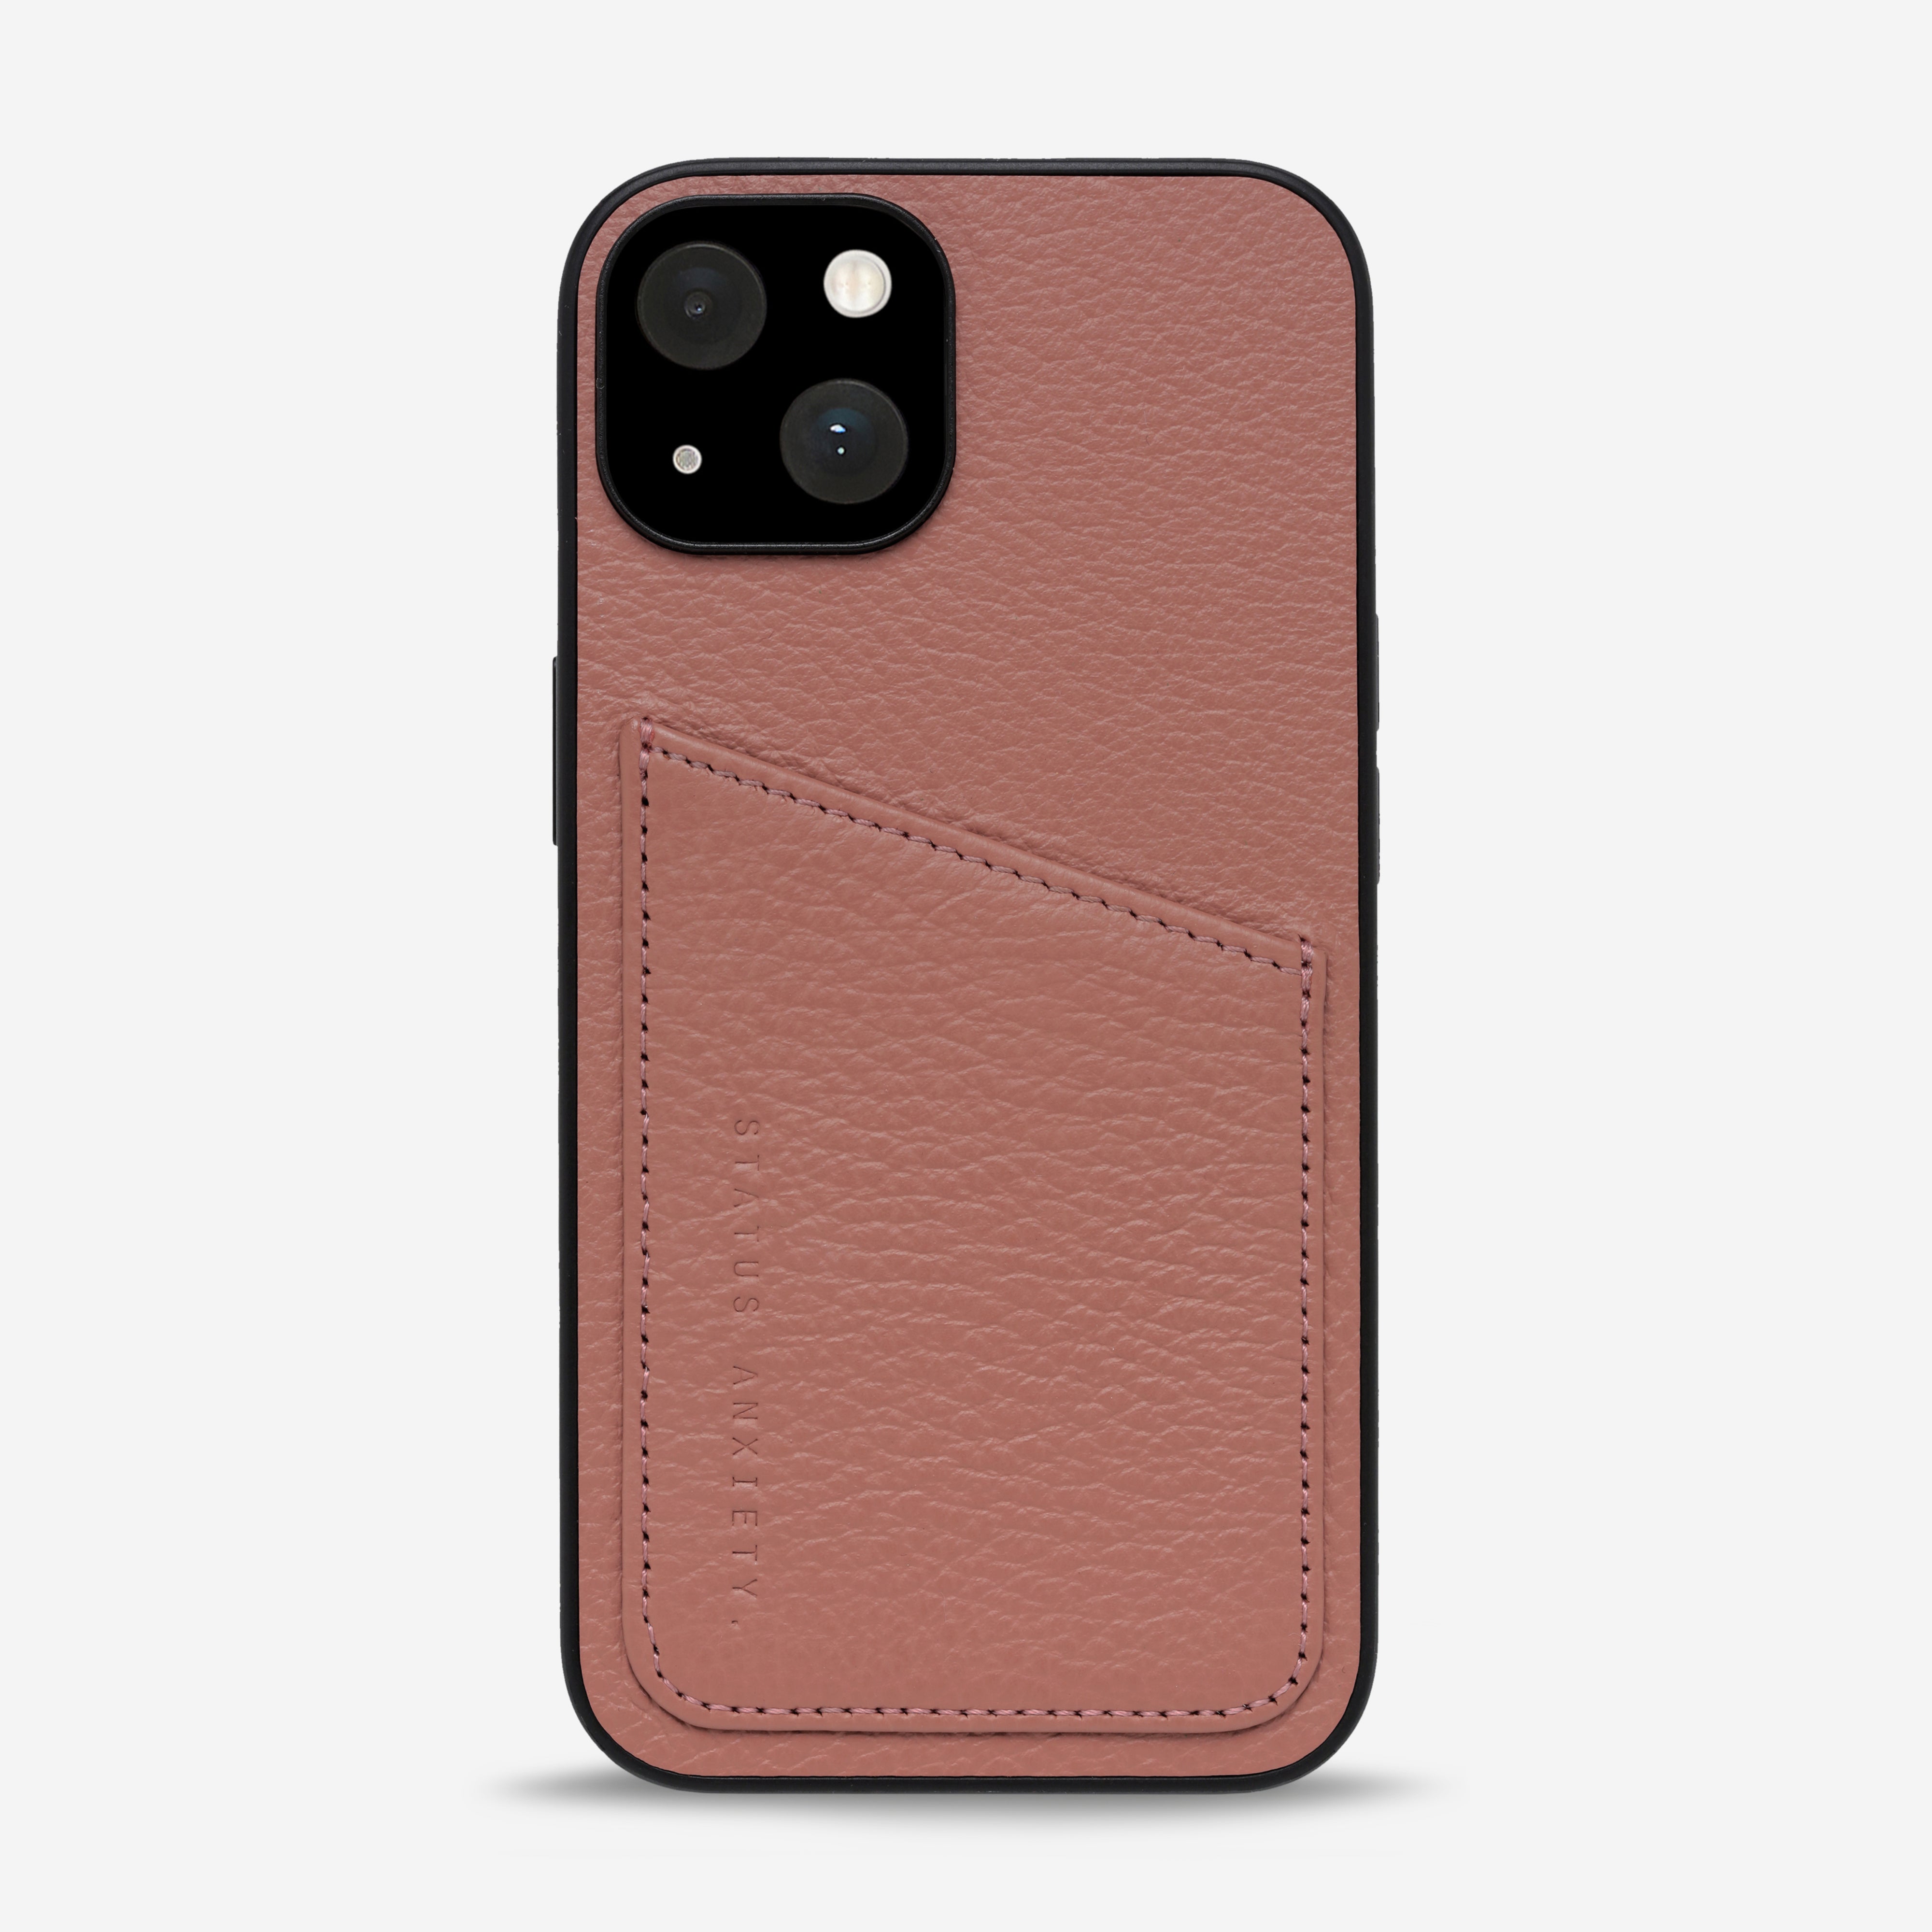 Who's Who Phone Case - Dusty Rose